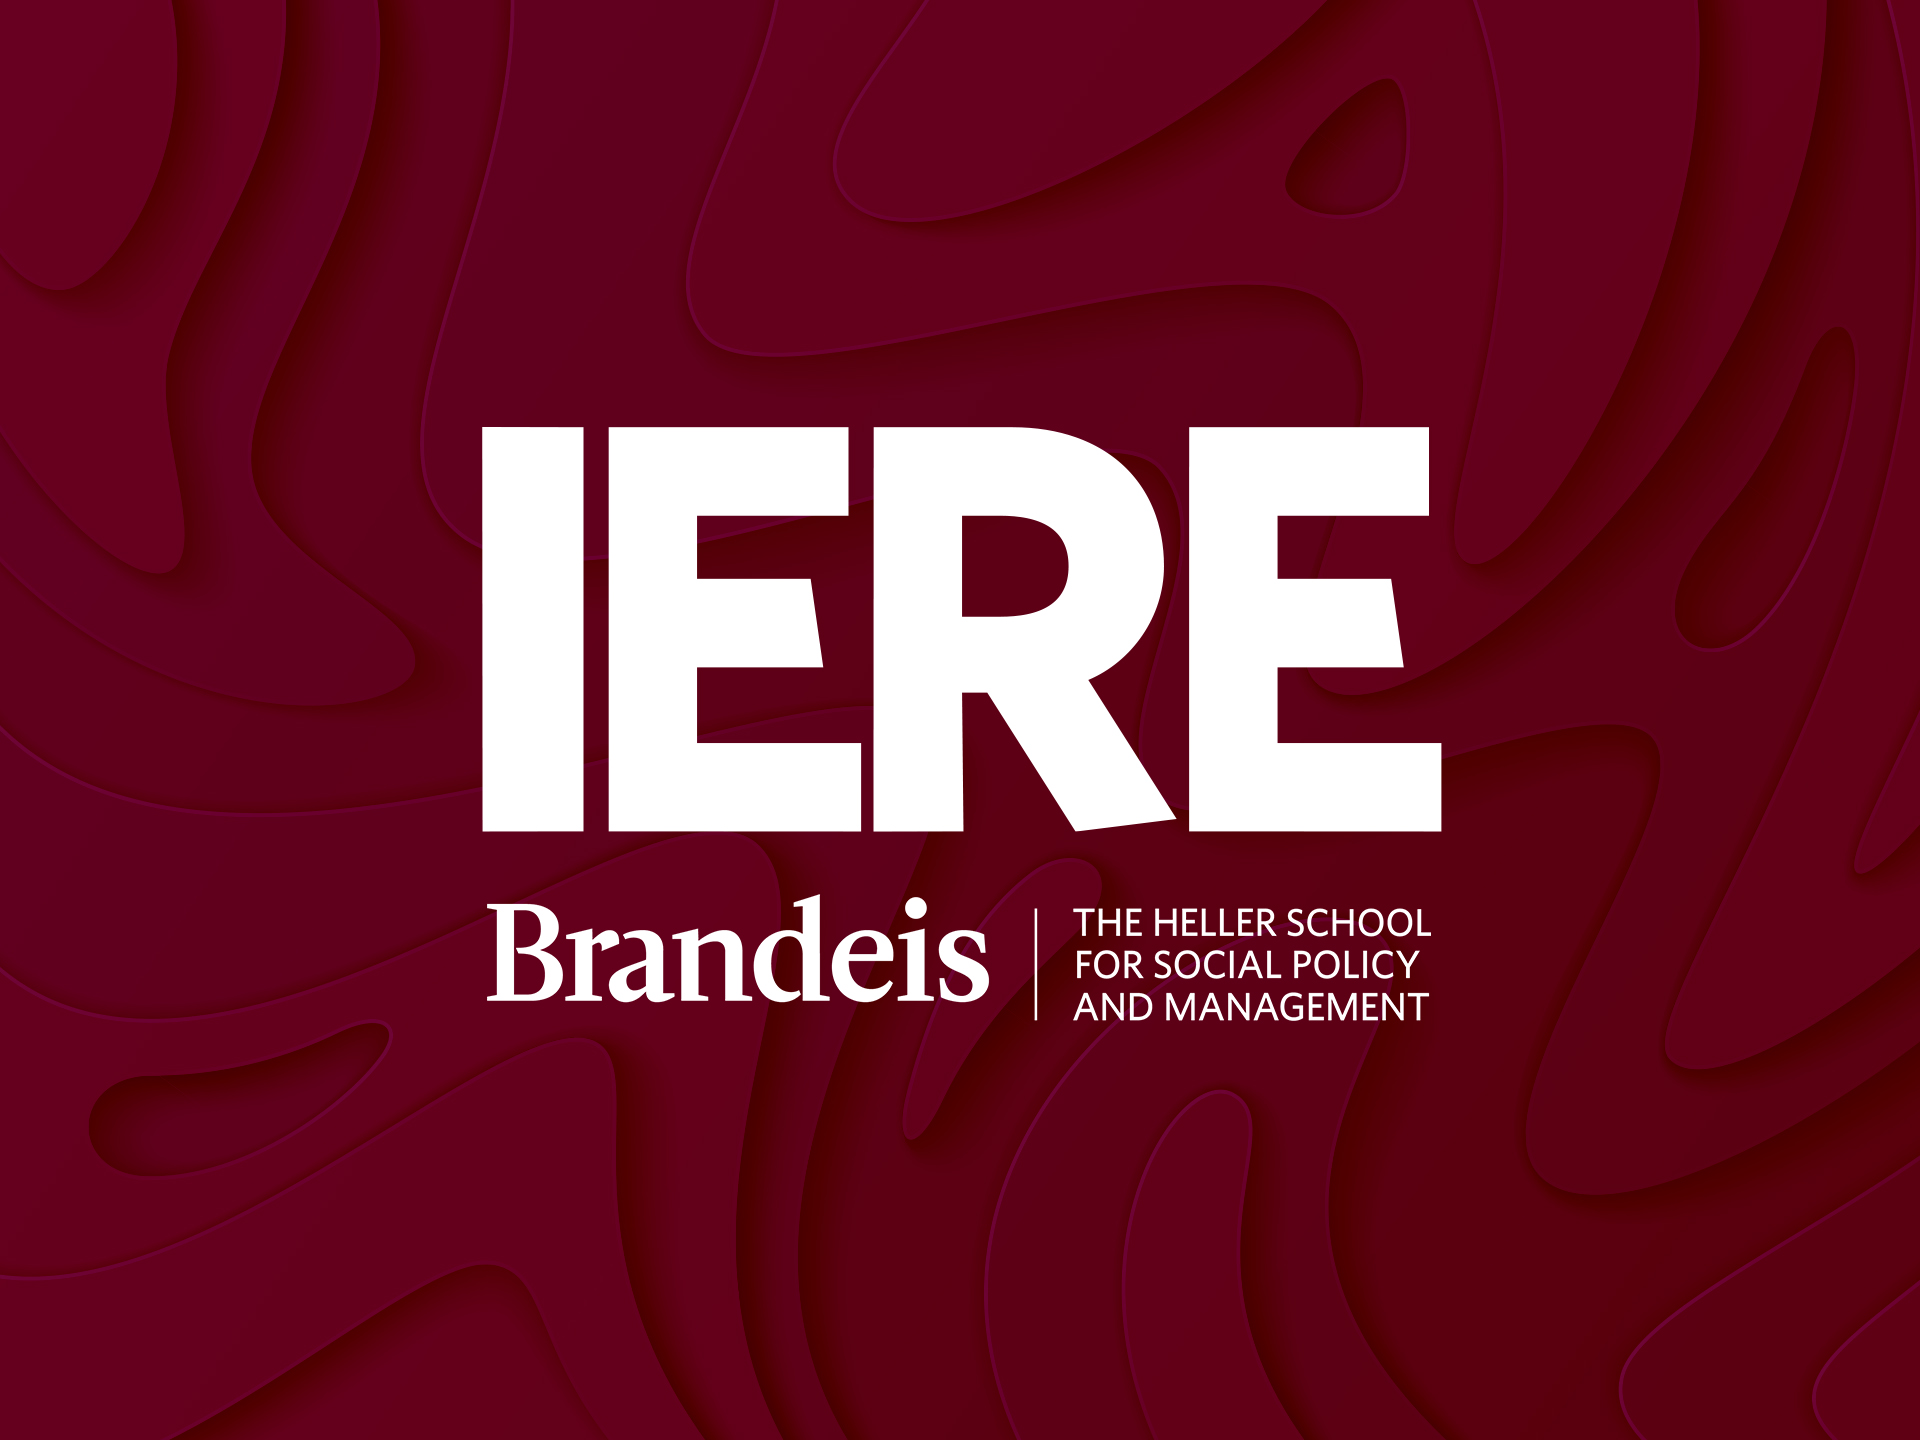 The letters I, E, R, E in large bold white text on a dark maroon background with a sharp wavy texture.